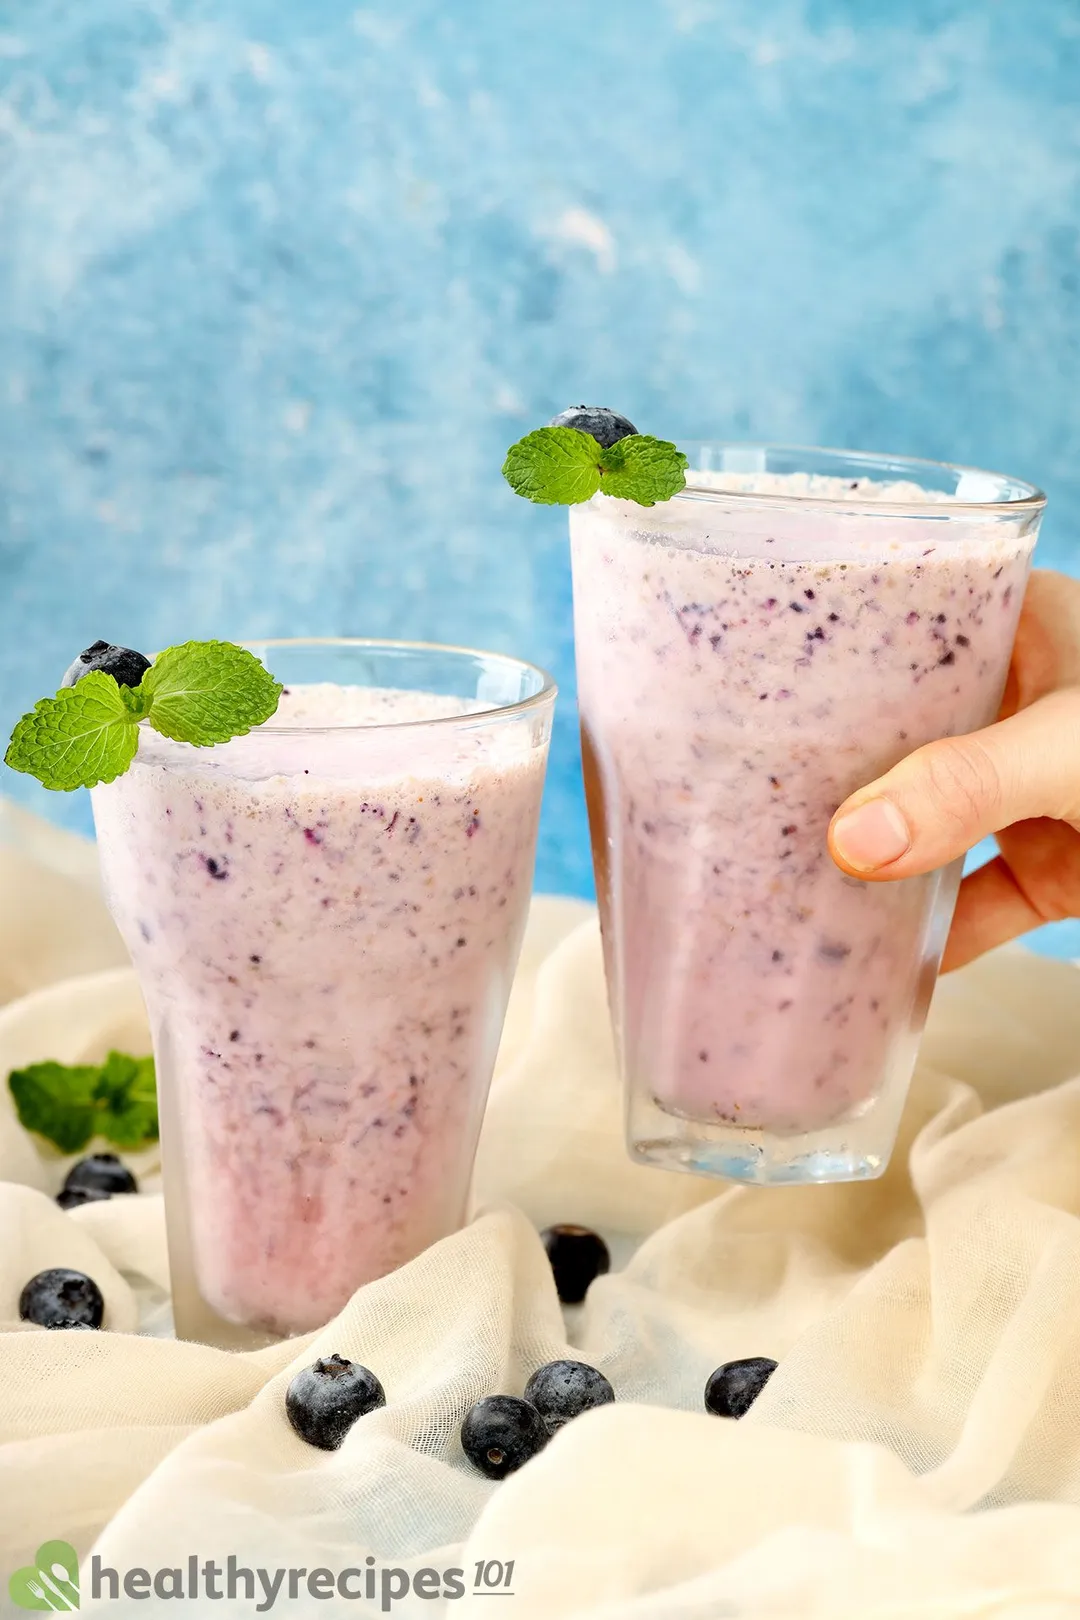 two glasses of blueberry yogurt smoothie, hand hold one